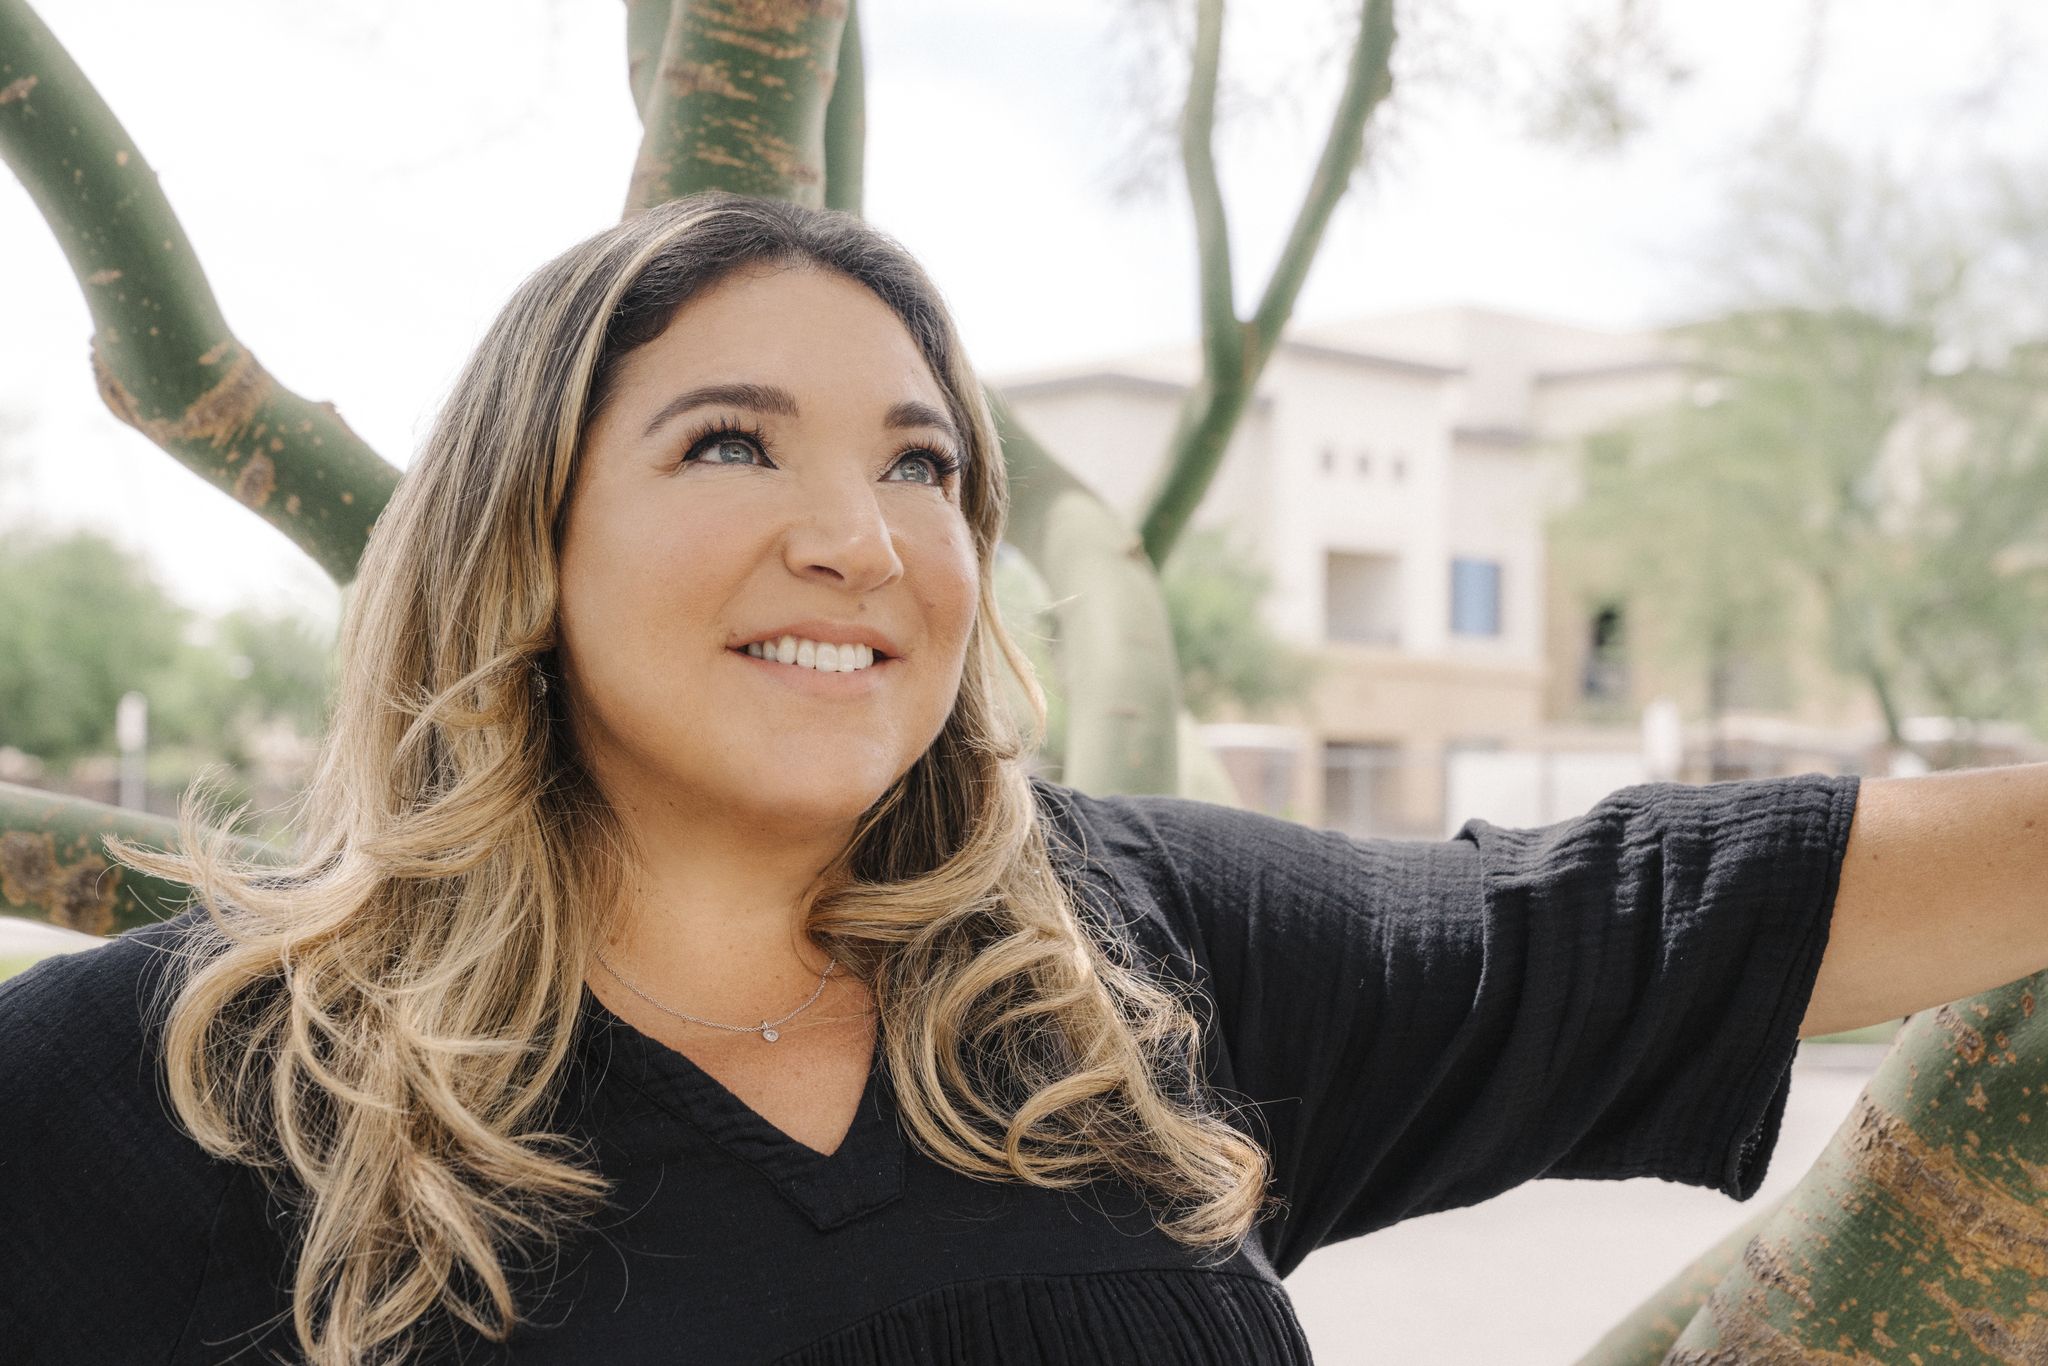 Supernanny' Jo Frost Helps Families Navigate Parenting Burnout at Home in  Season 8, Part 2